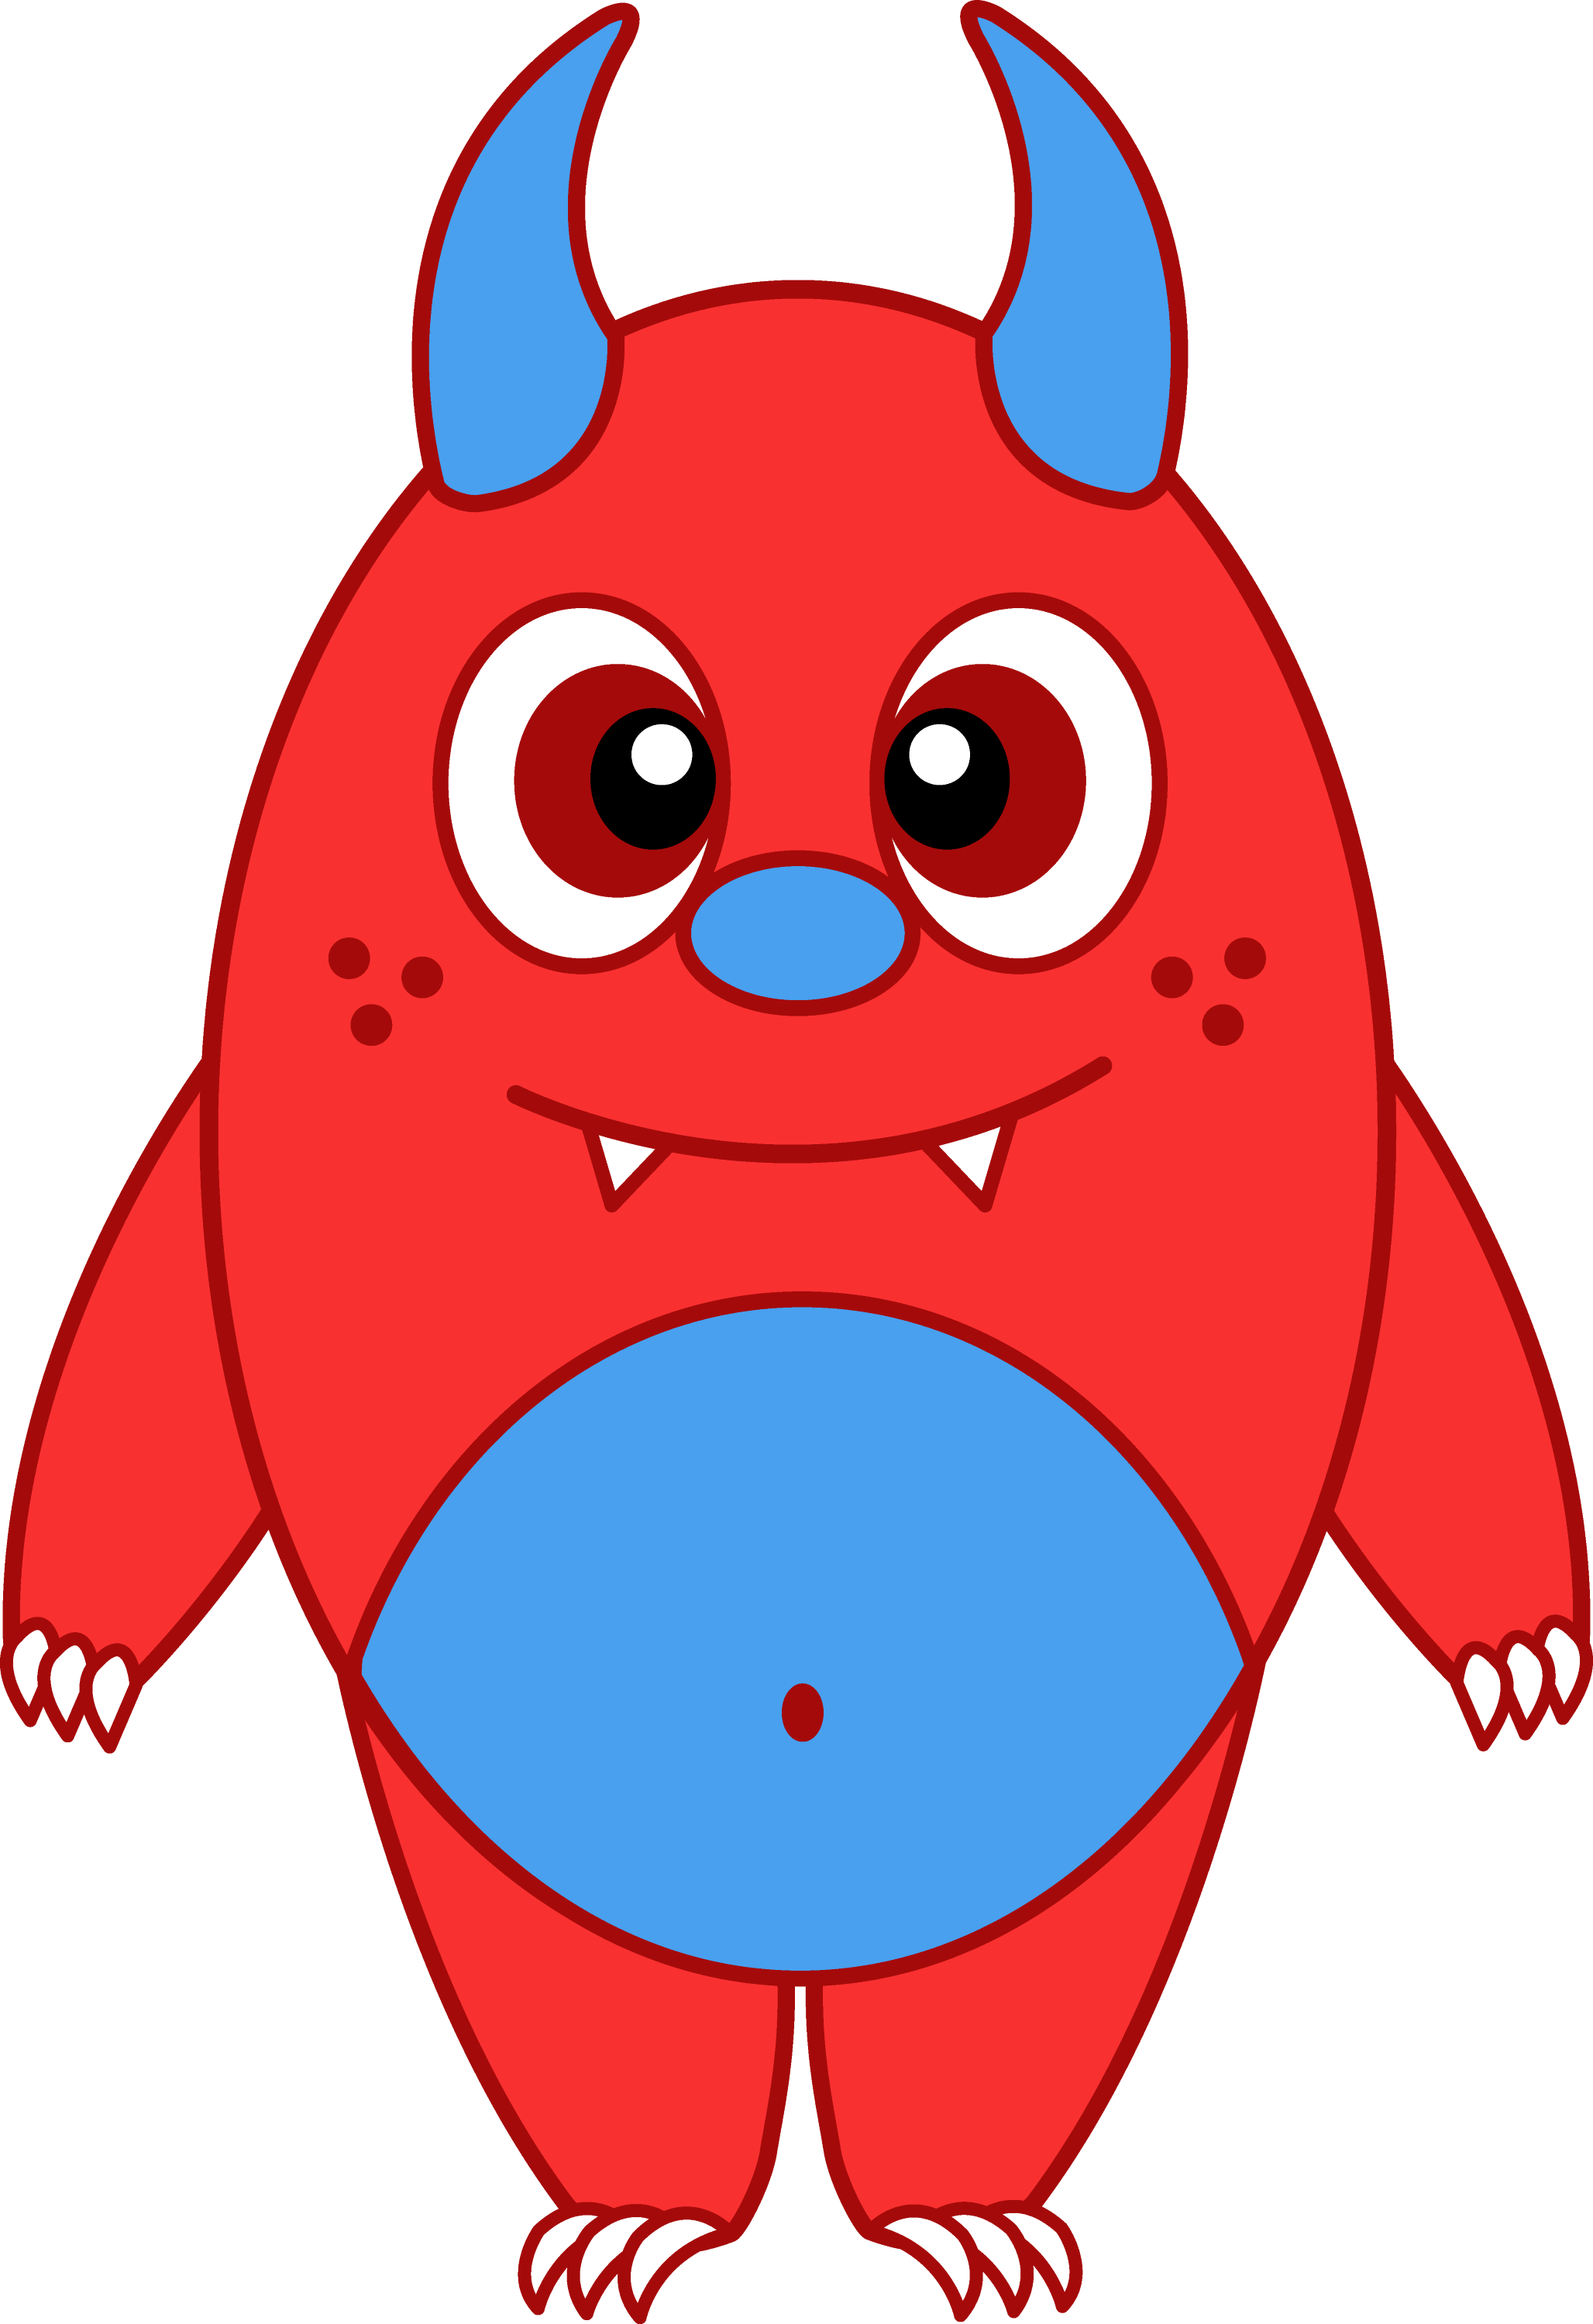 Silly Little Red Monster Free Clip Art